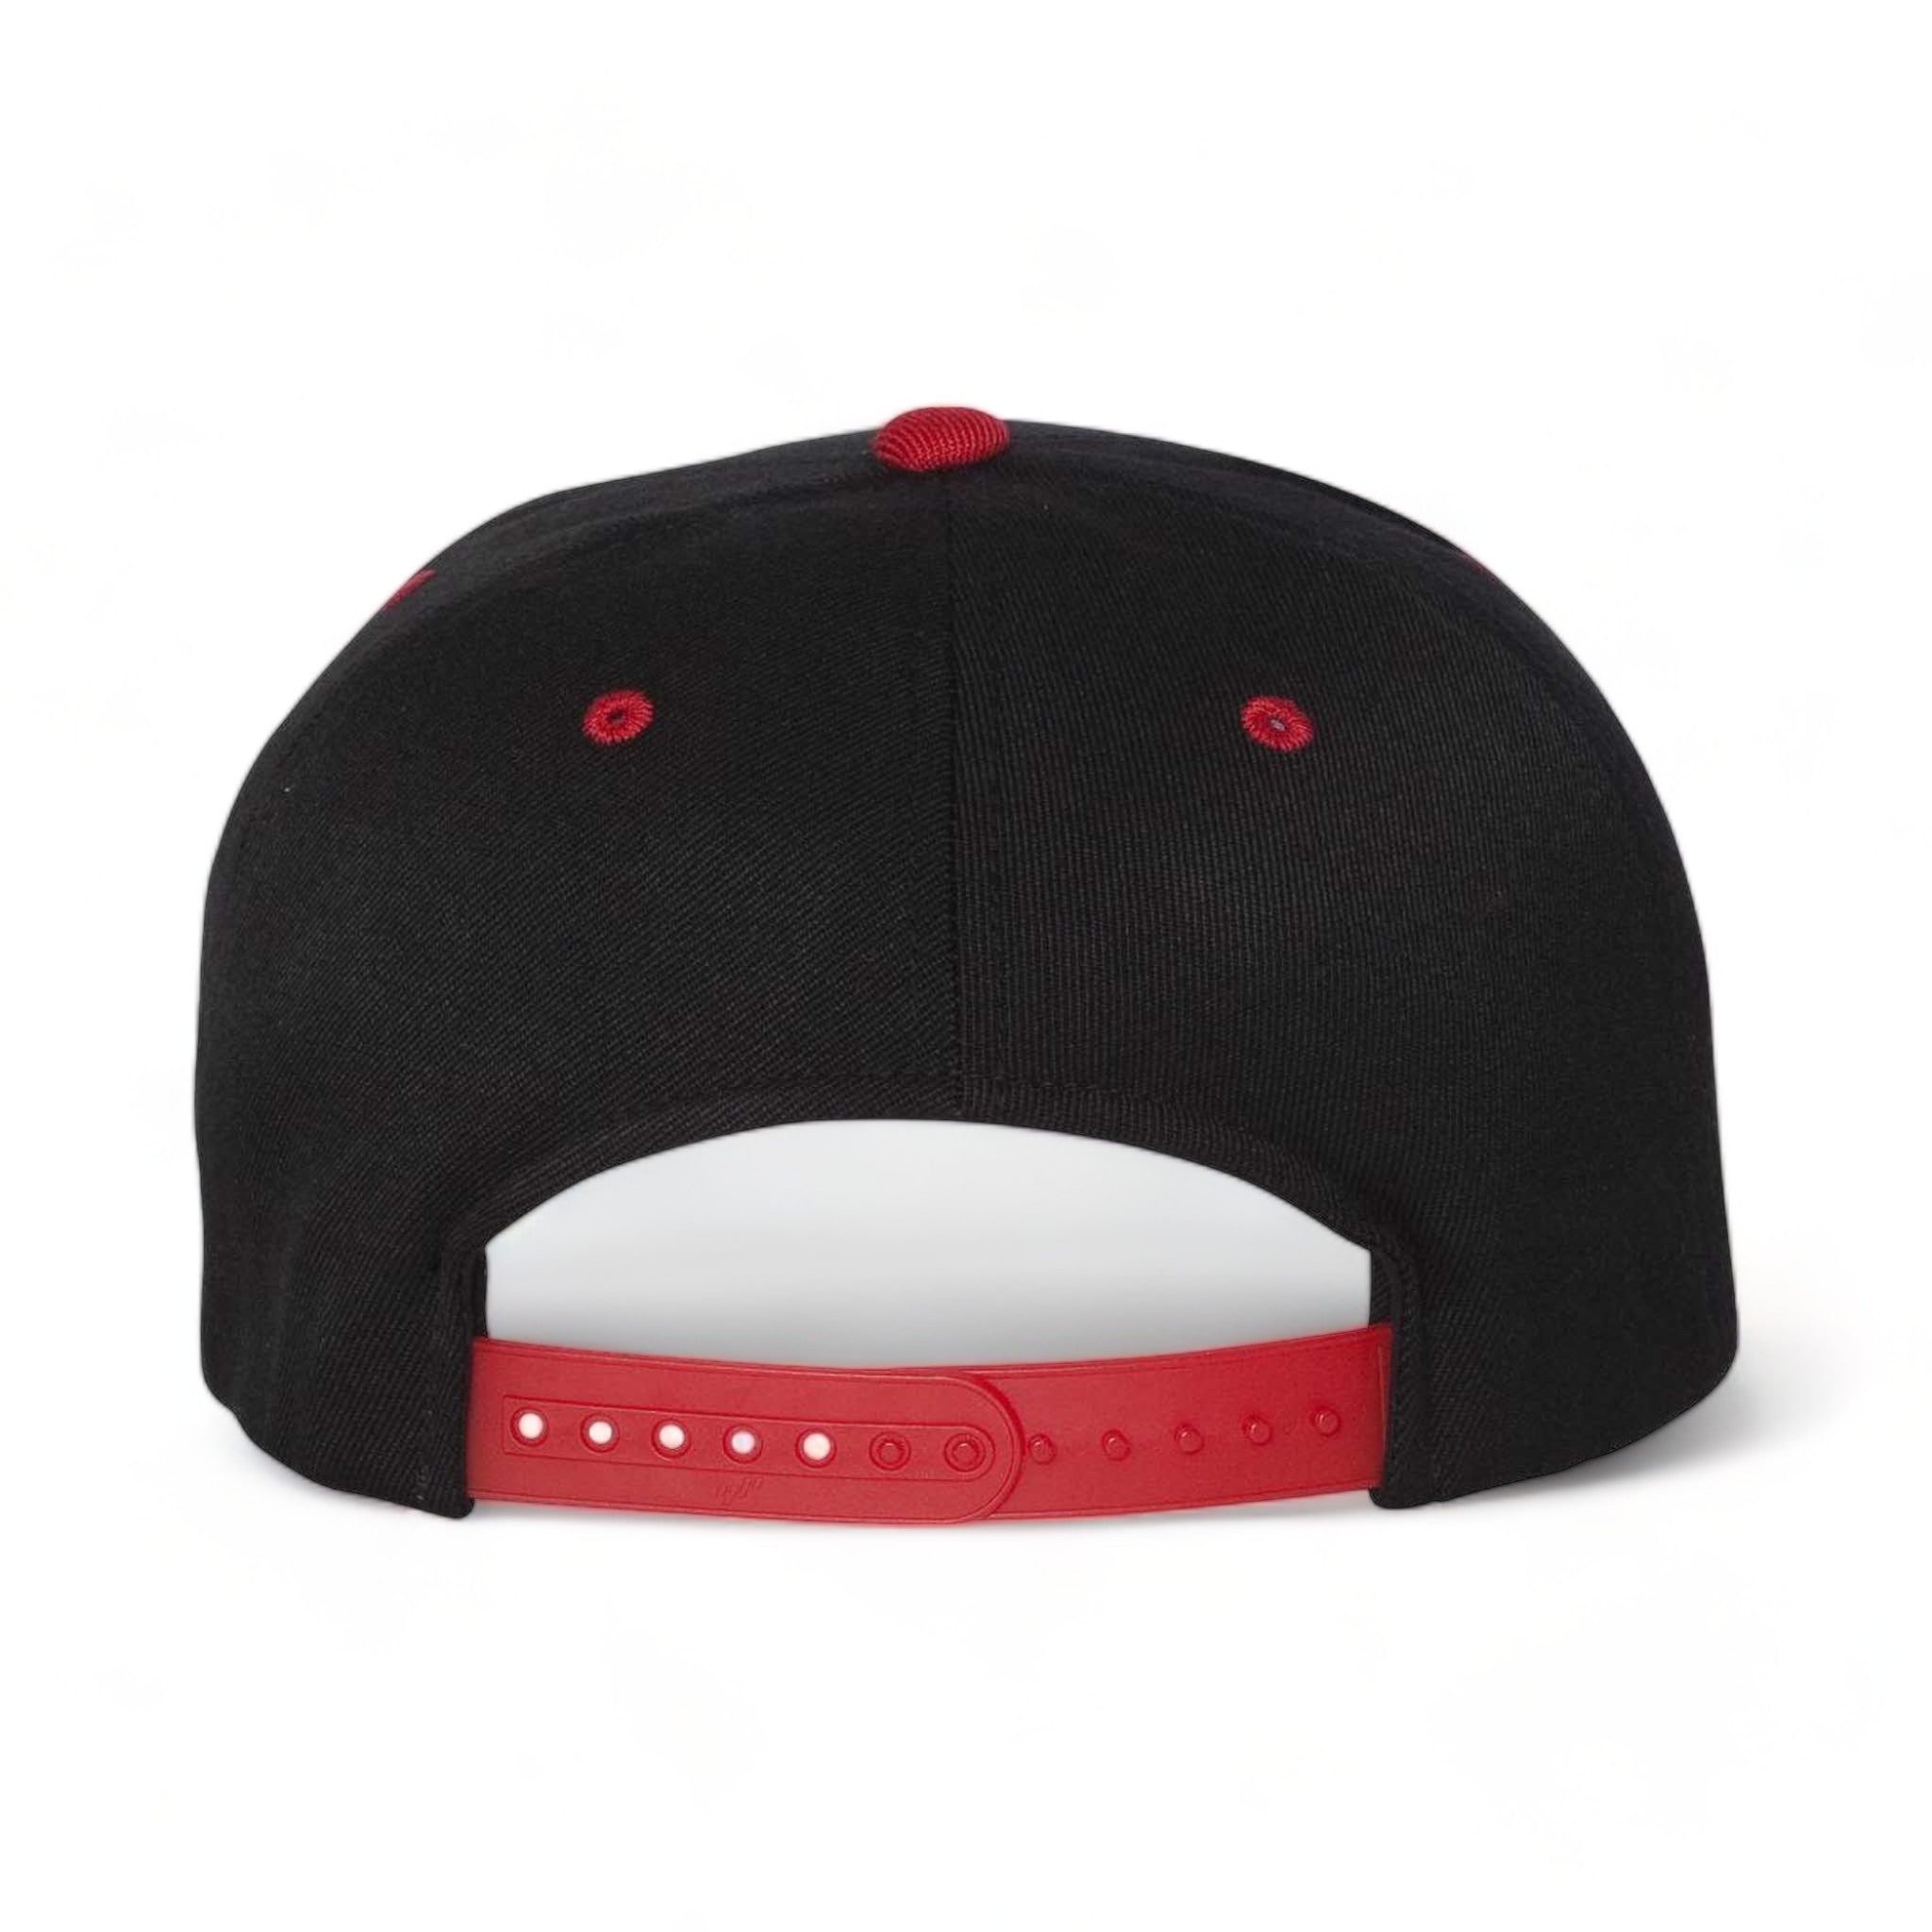 Back view of Flexfit 110F custom hat in black and red